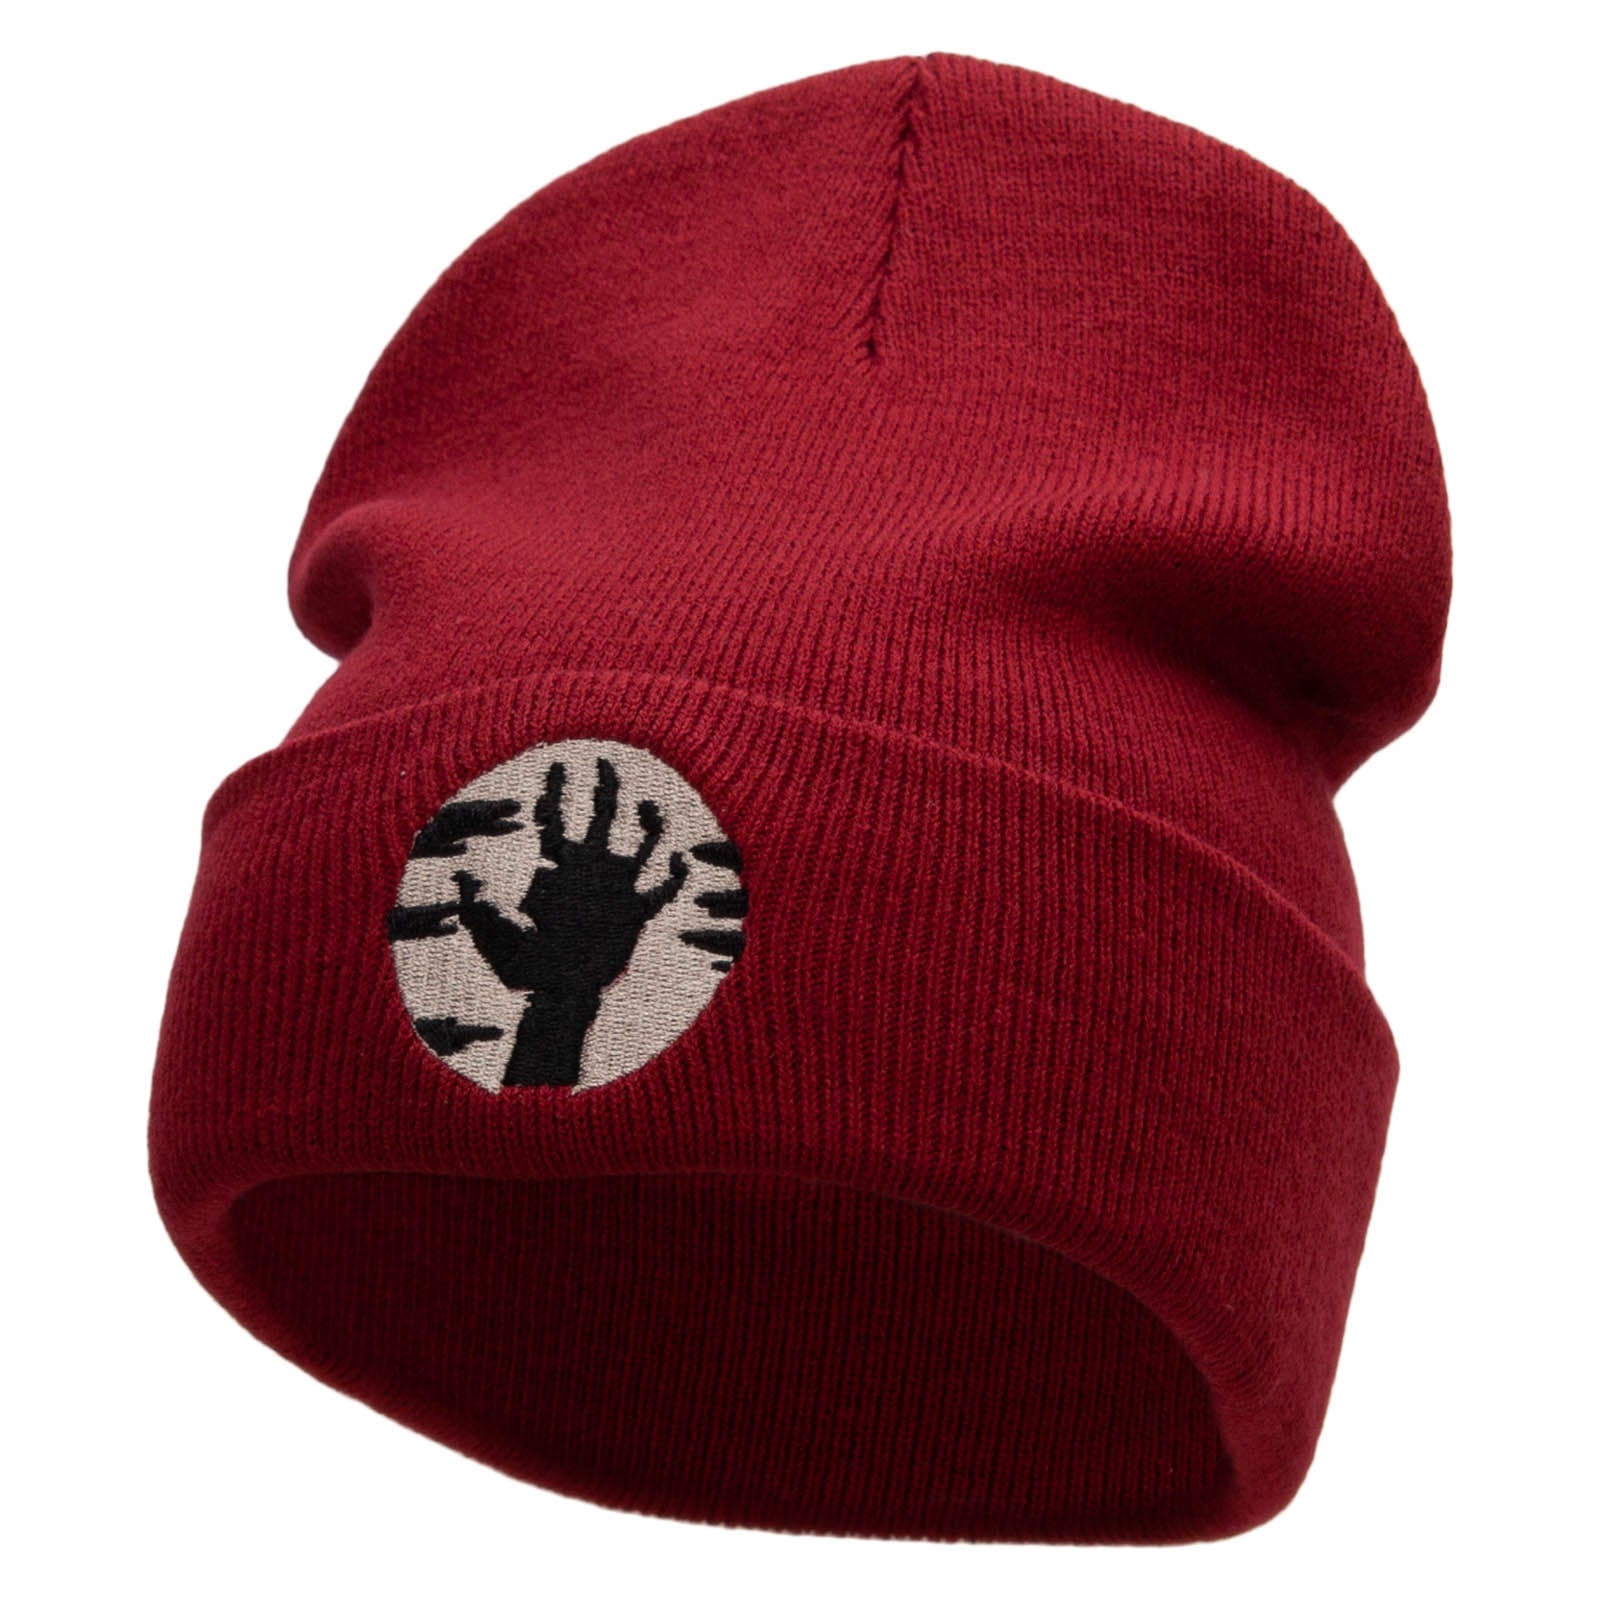 Awaken Embroidered 12 Inch Long Knitted Beanie - Maroon OSFM